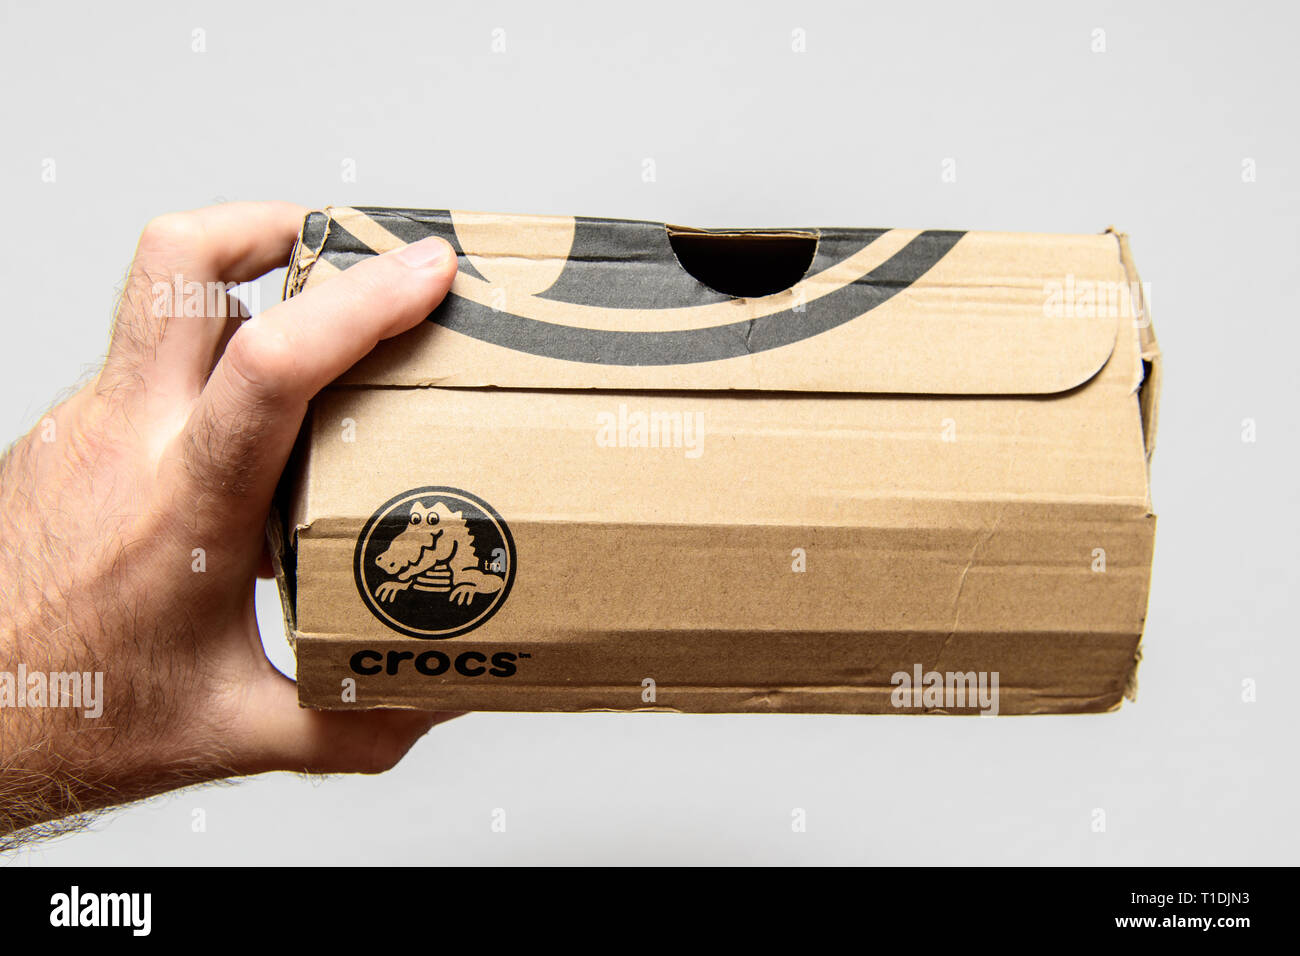 Paris, France - Jun 12, 2018: Freshly delivered Crocs shoes cardboard box featuring big crocodile logotype side view of the damaged cardboard box Stock Photo